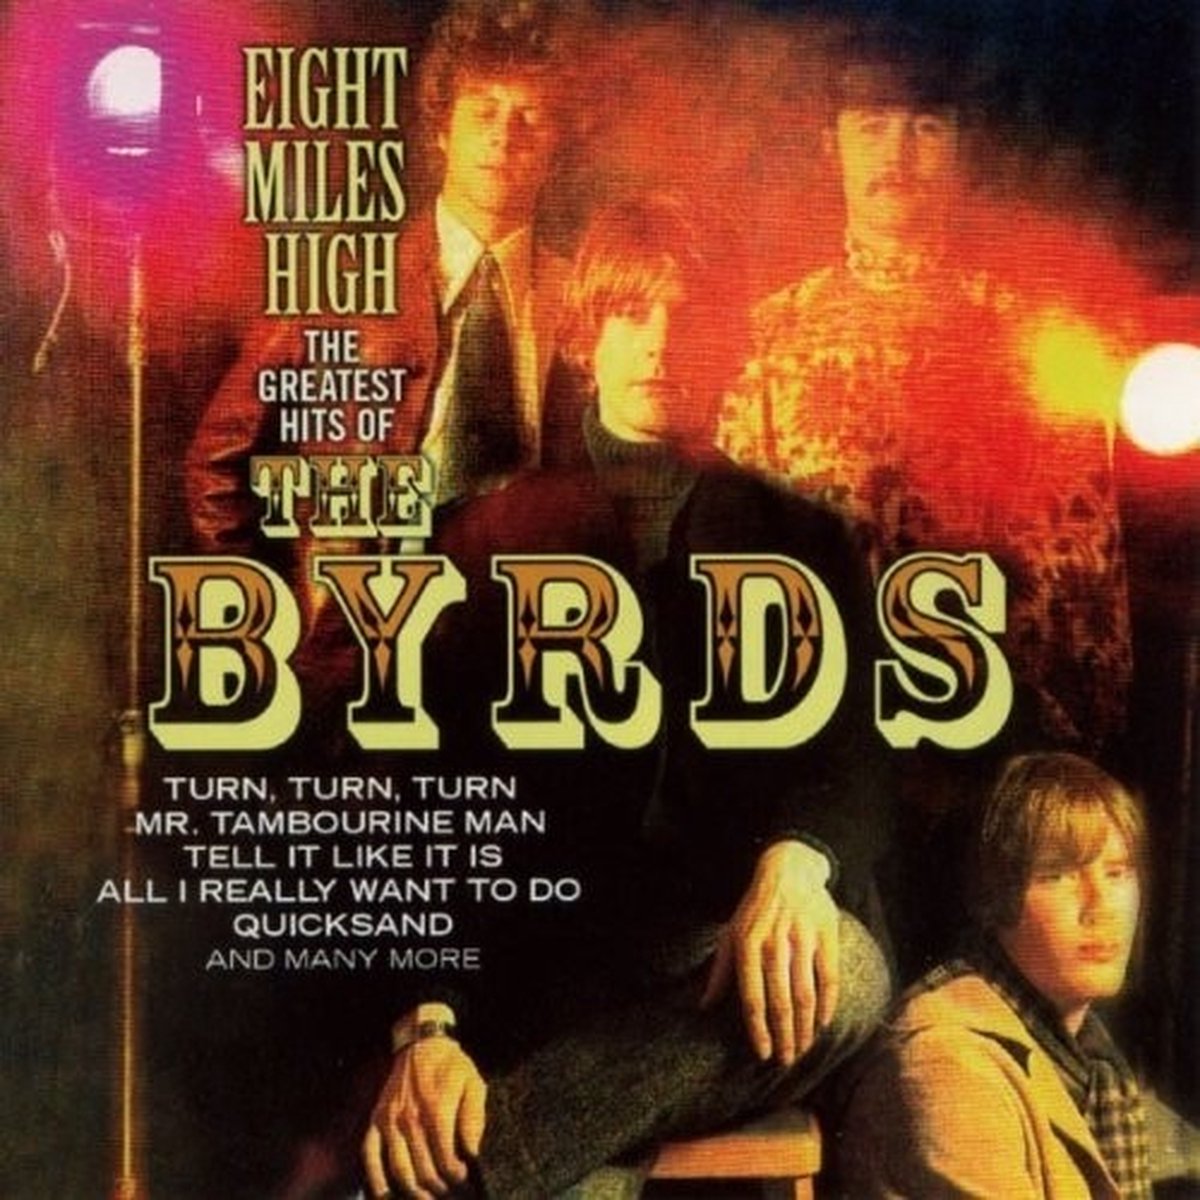 Byrds - Eight Miles High - Greatest Hits (CD) - Byrds